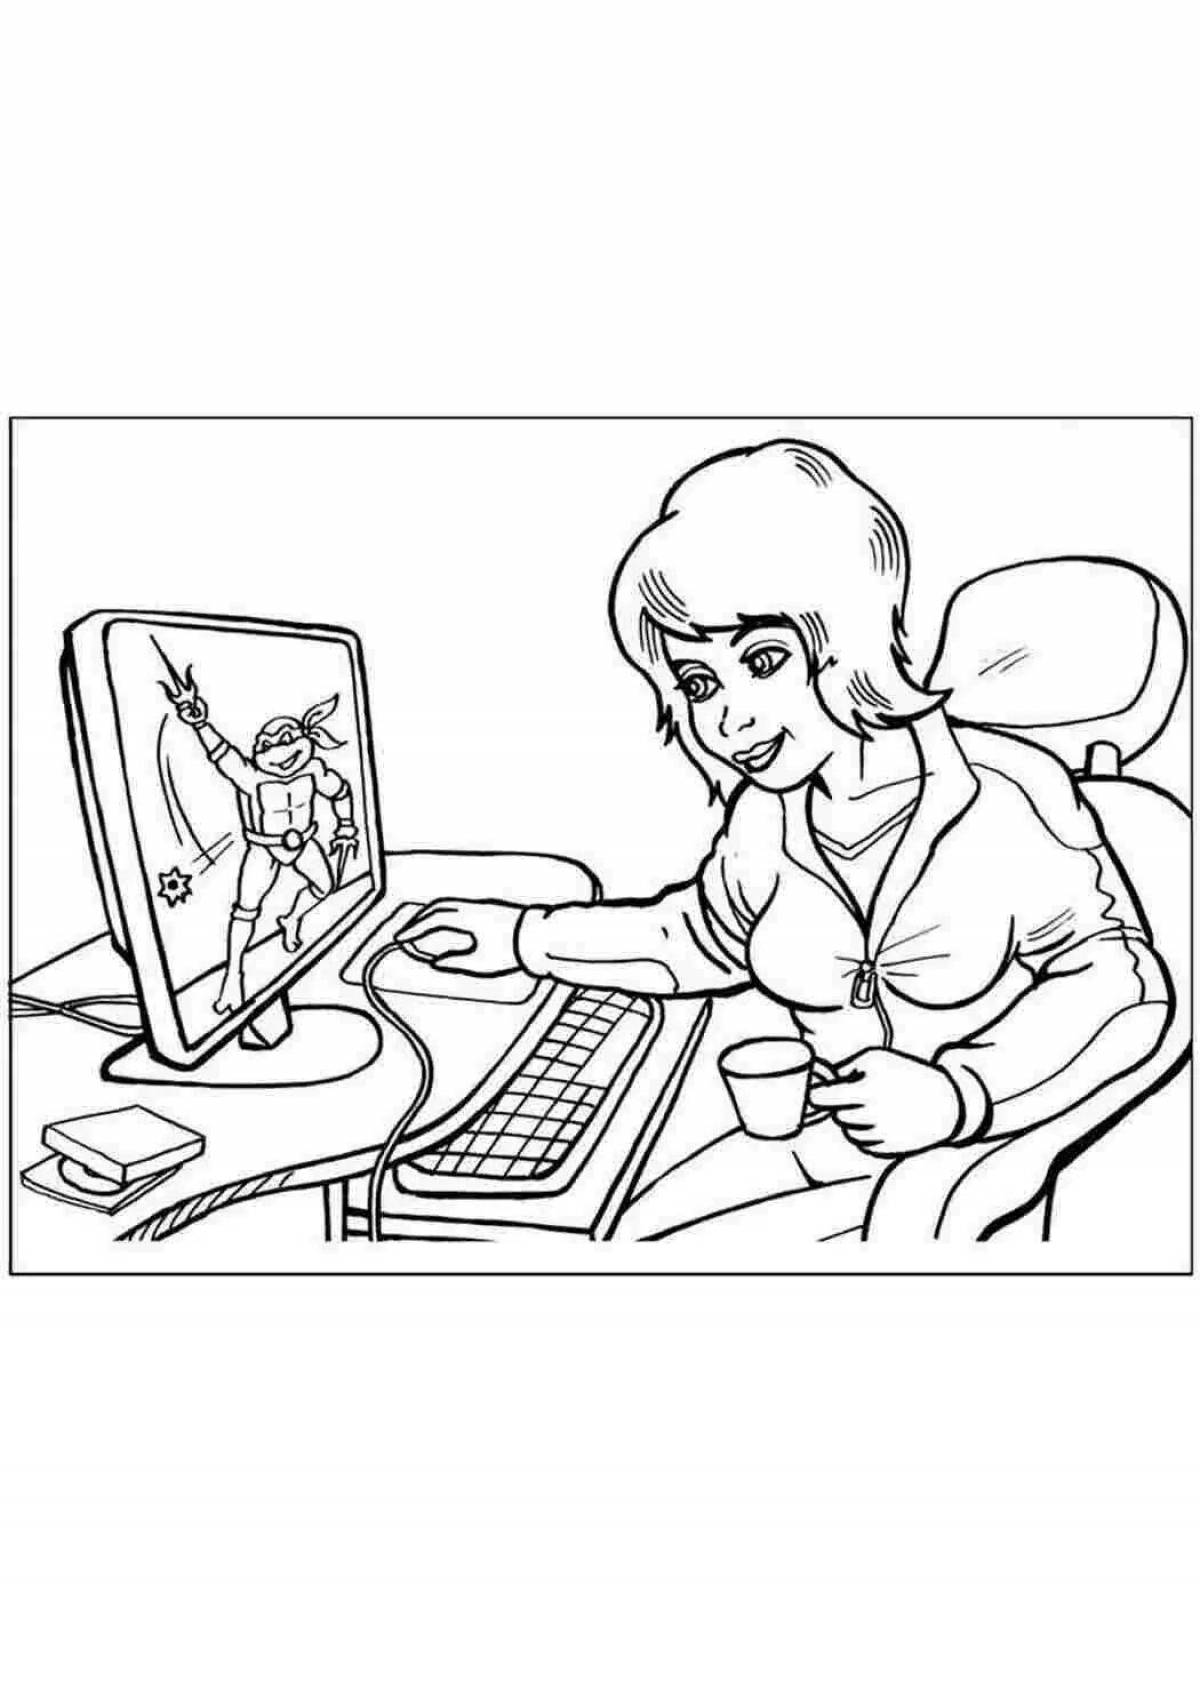 Cute accounting coloring book